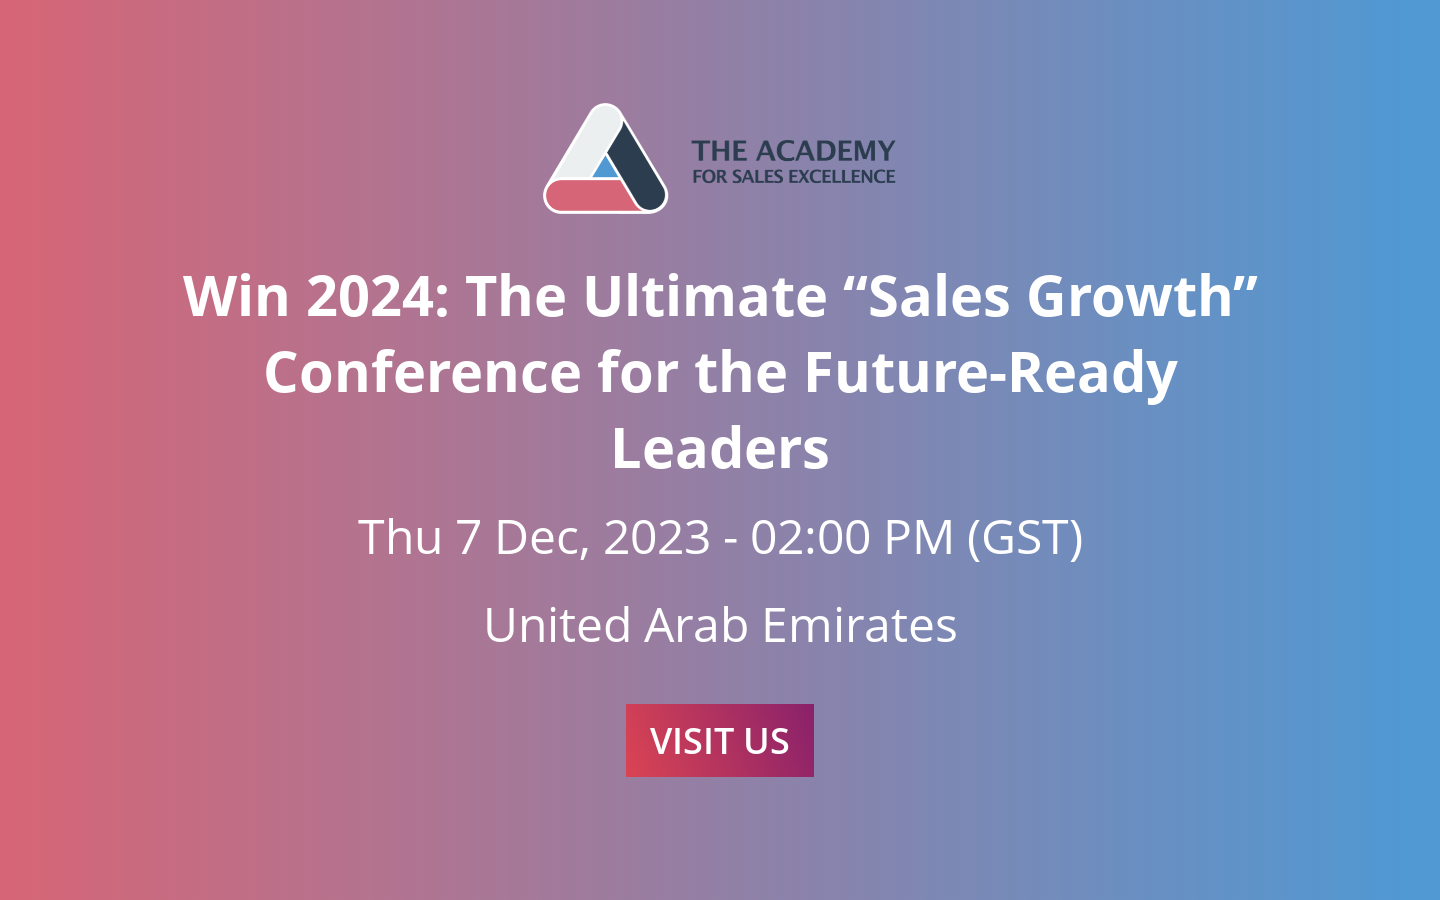 Win 2024 The Ultimate “Sales Growth” Conference for the FutureReady